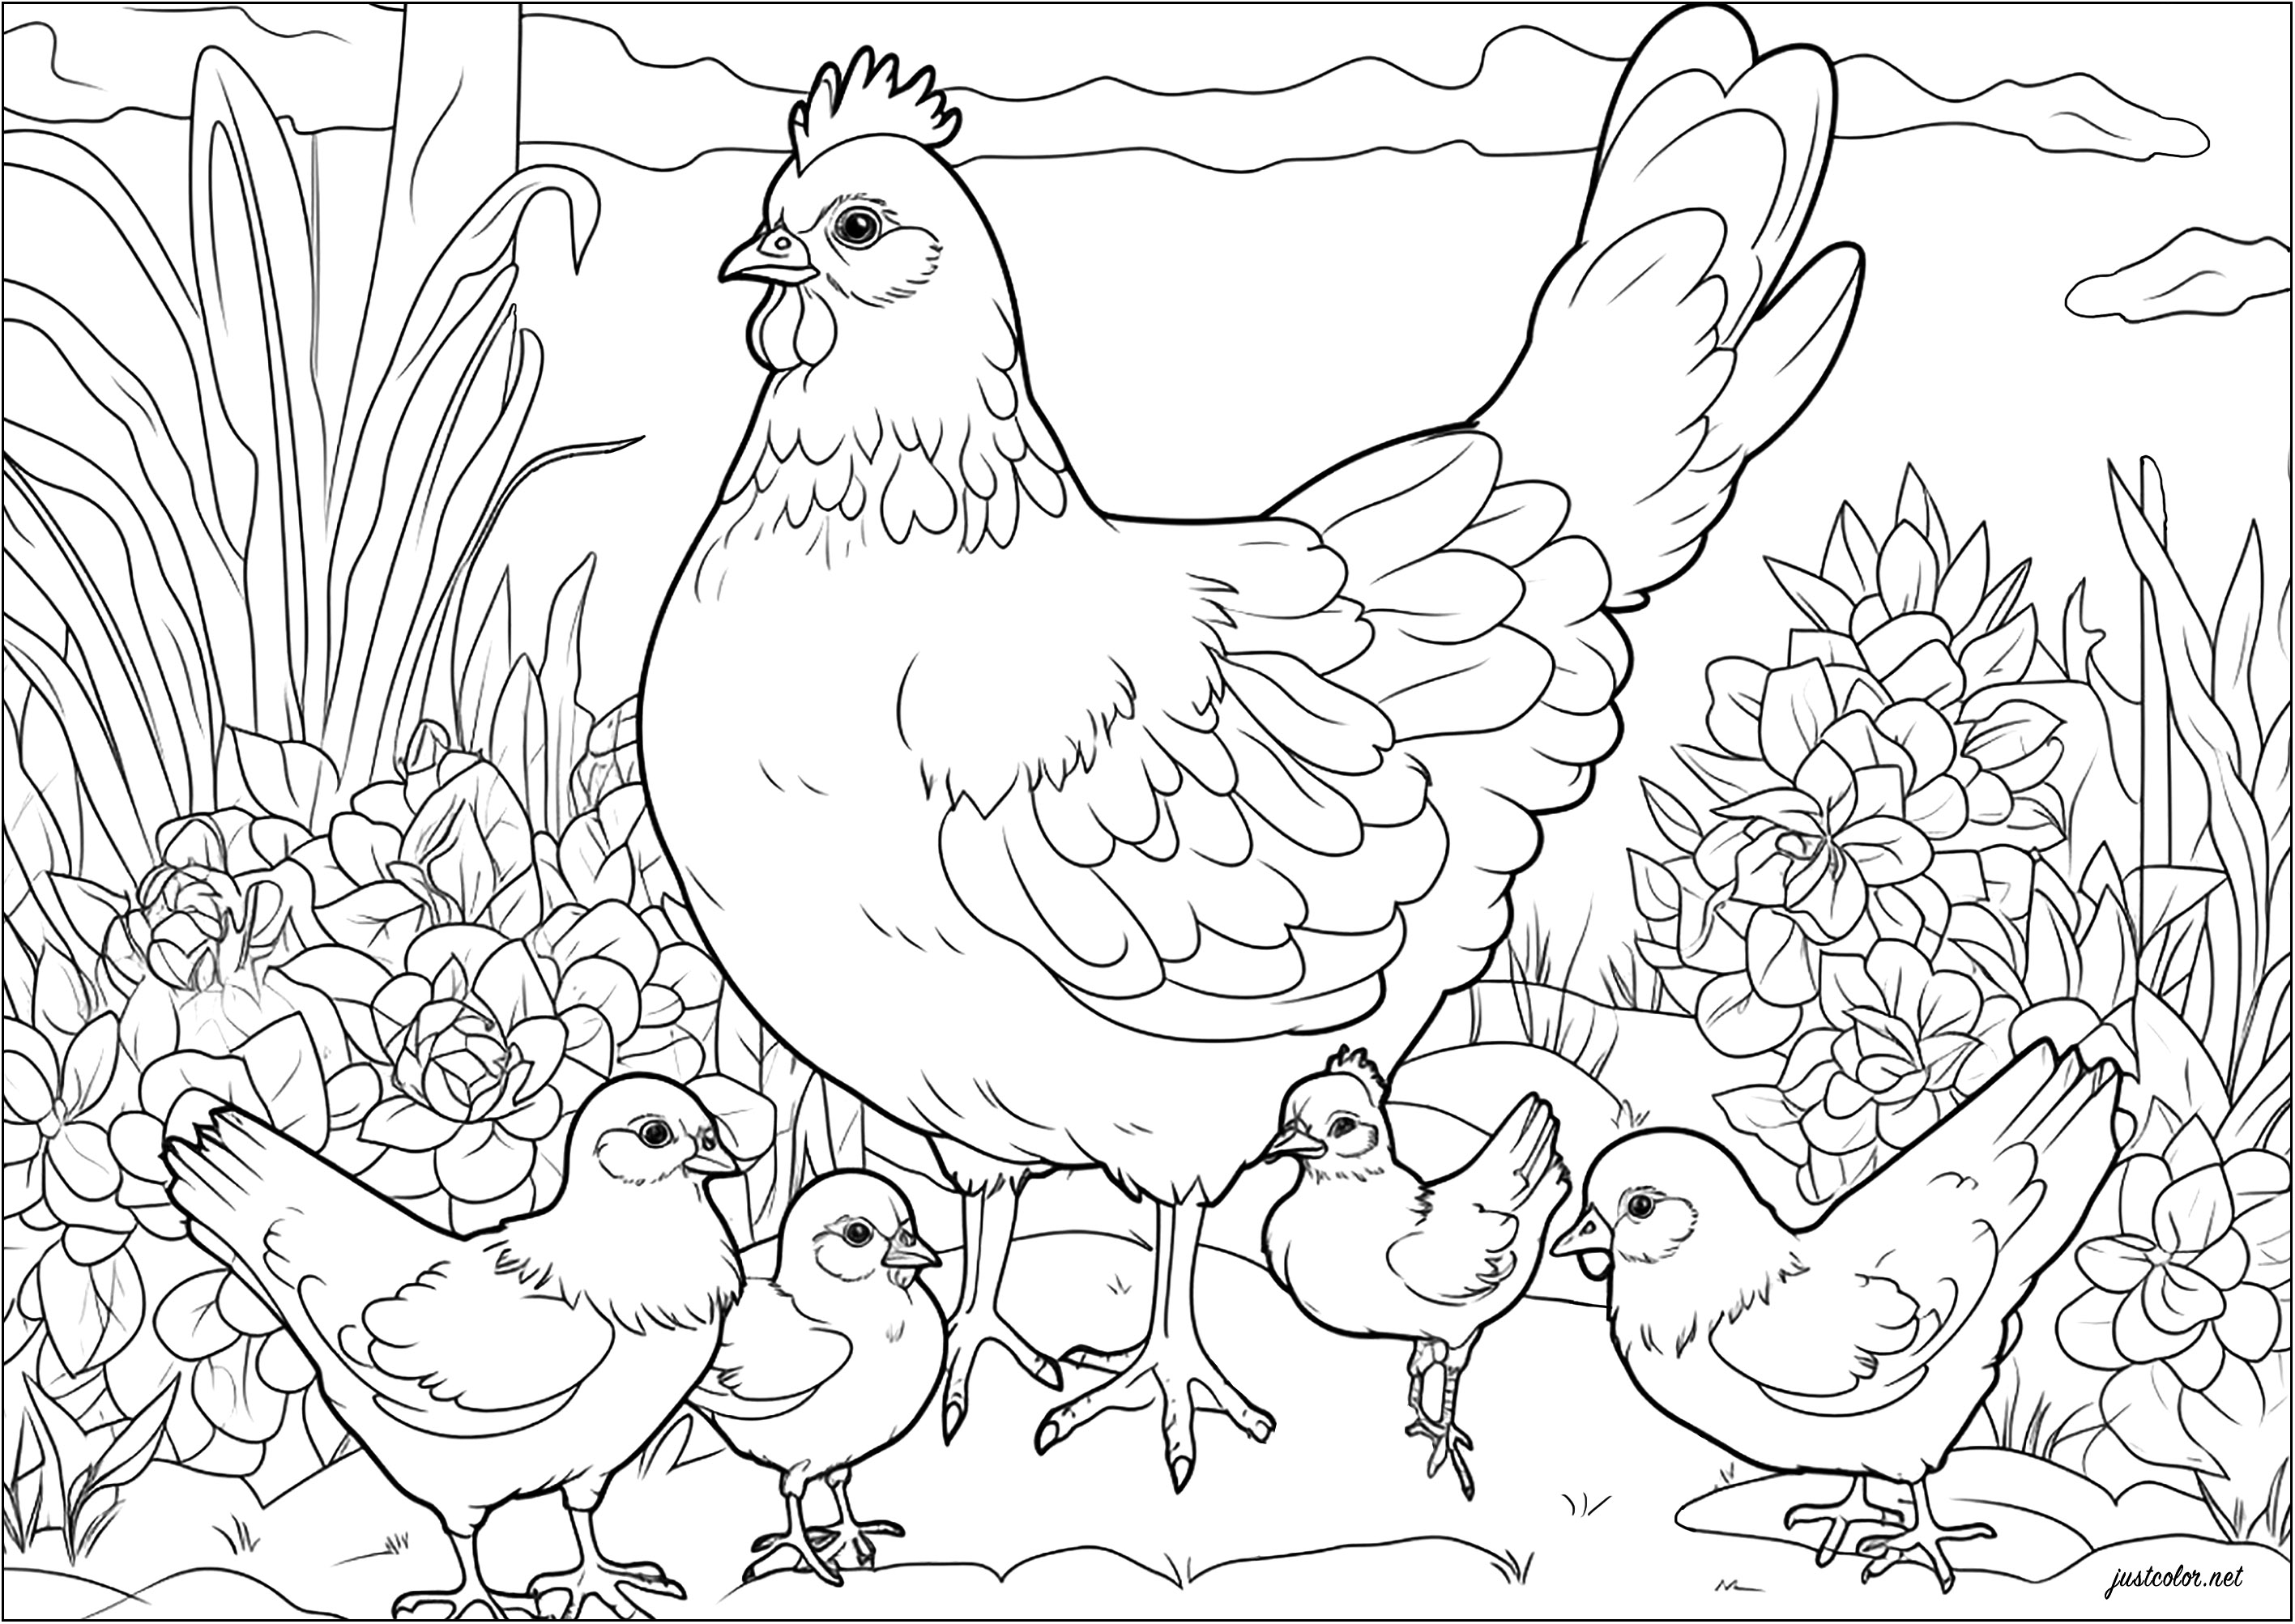 Coloring of a hen and her chicks. This hen is proudly protecting her young.
